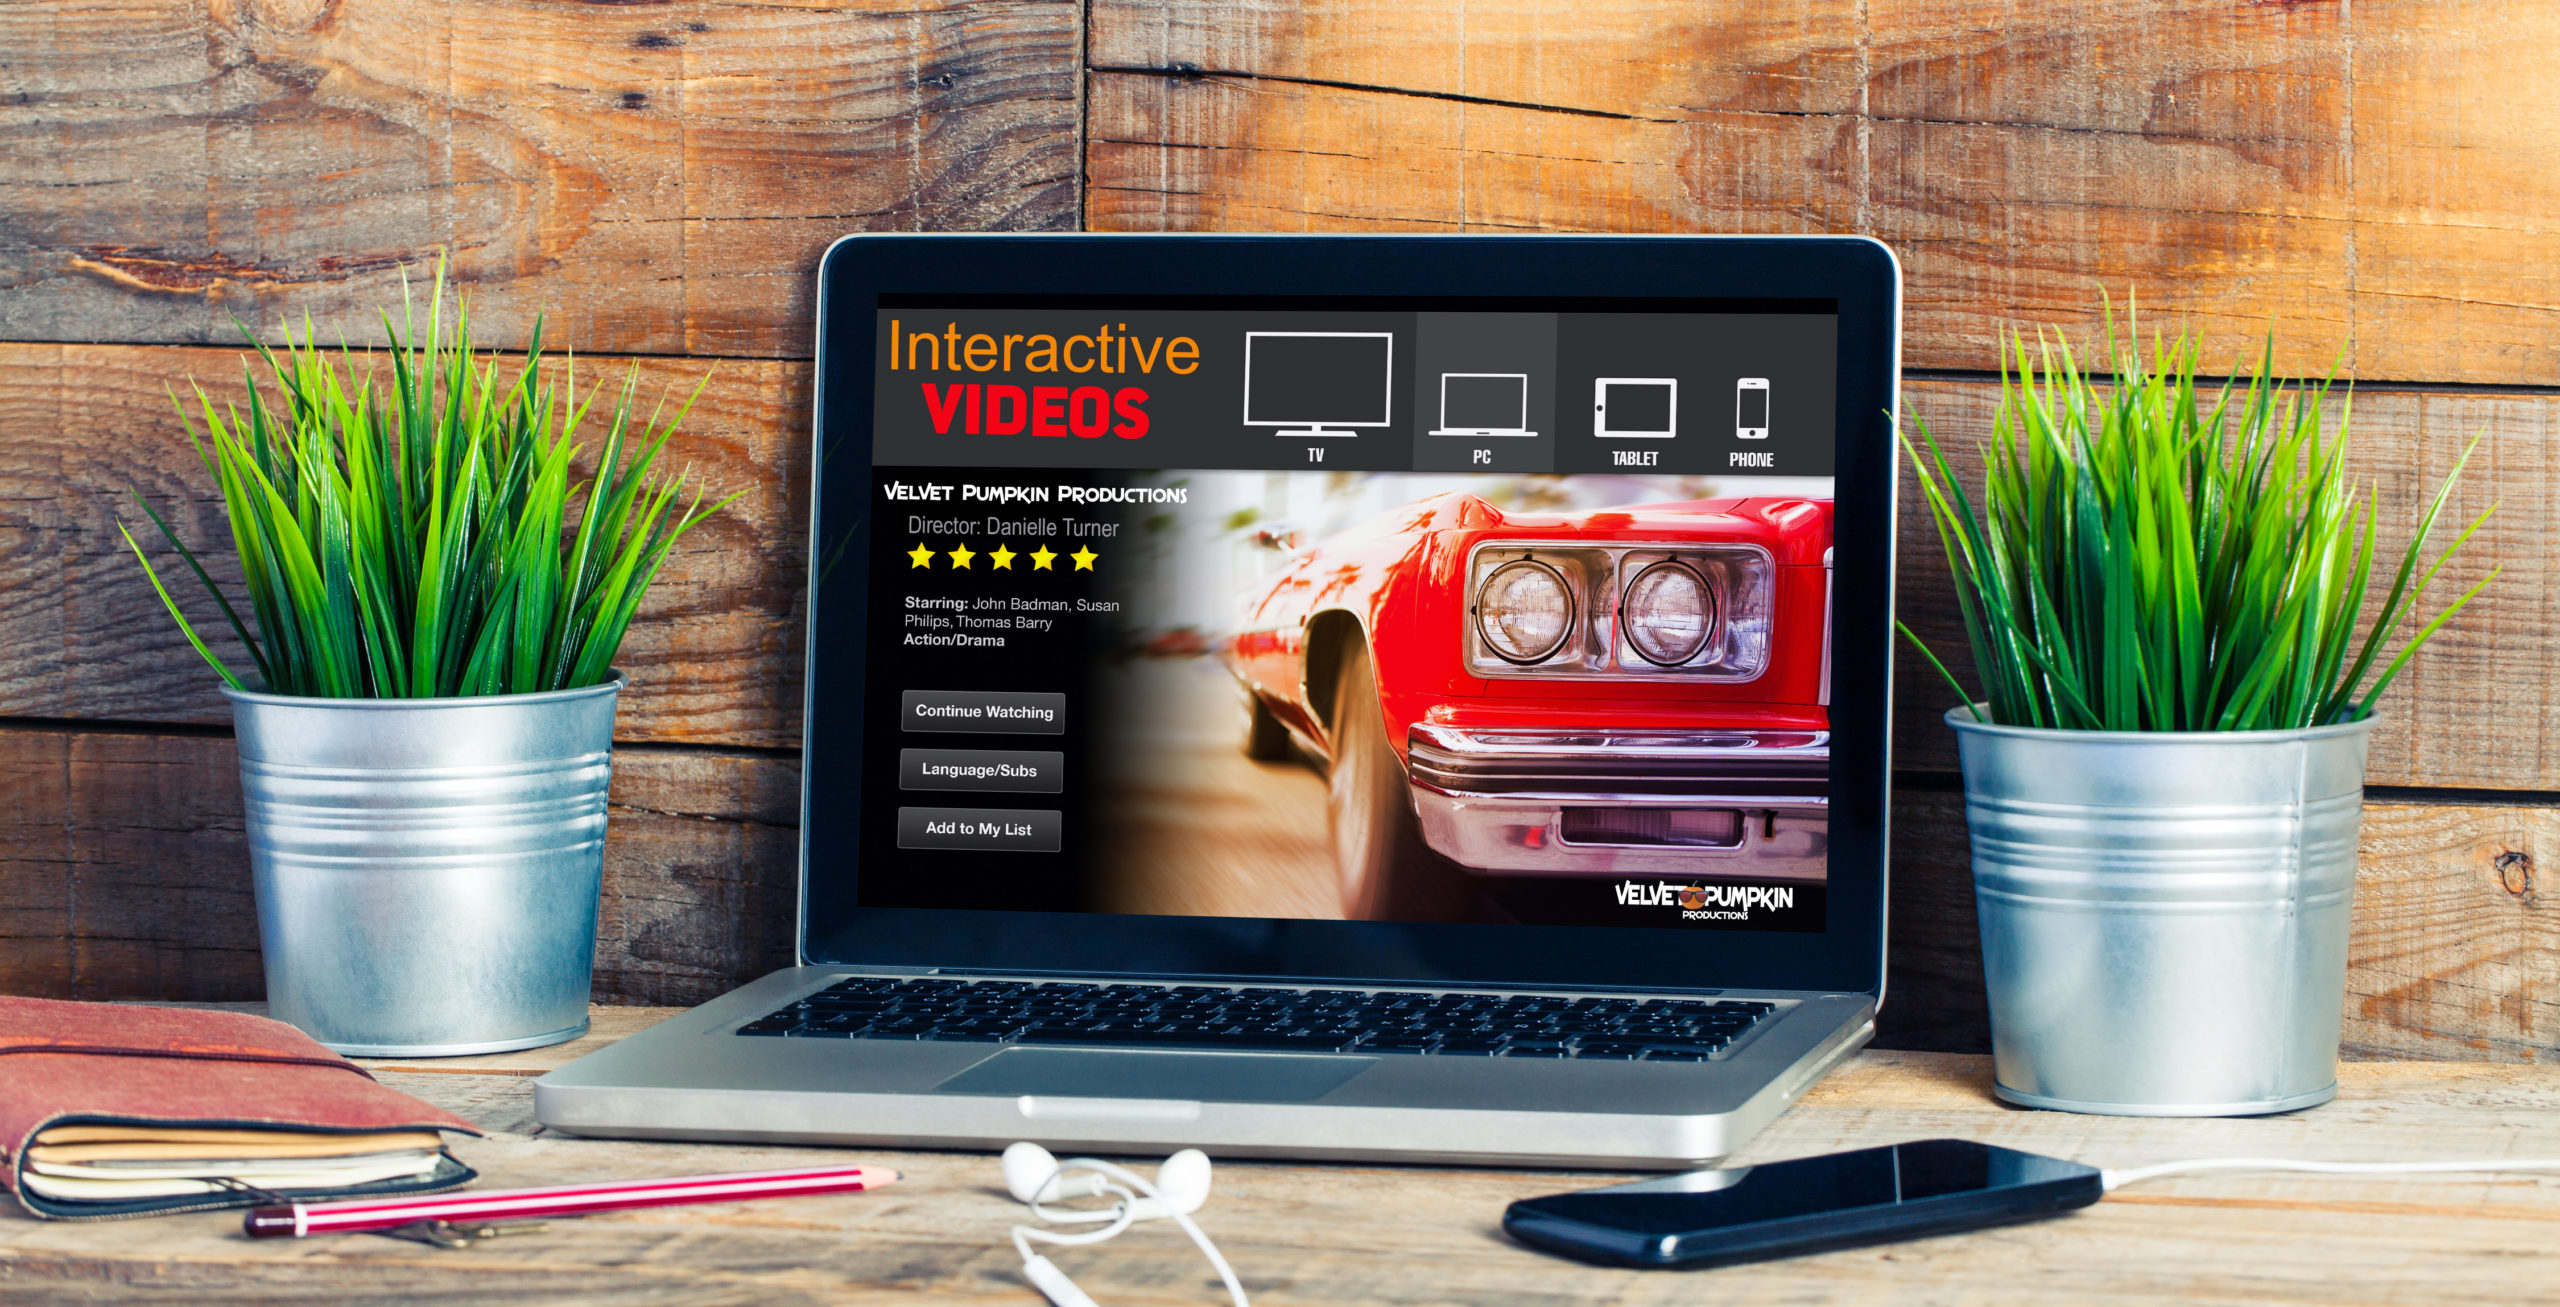 What is an interactive video?